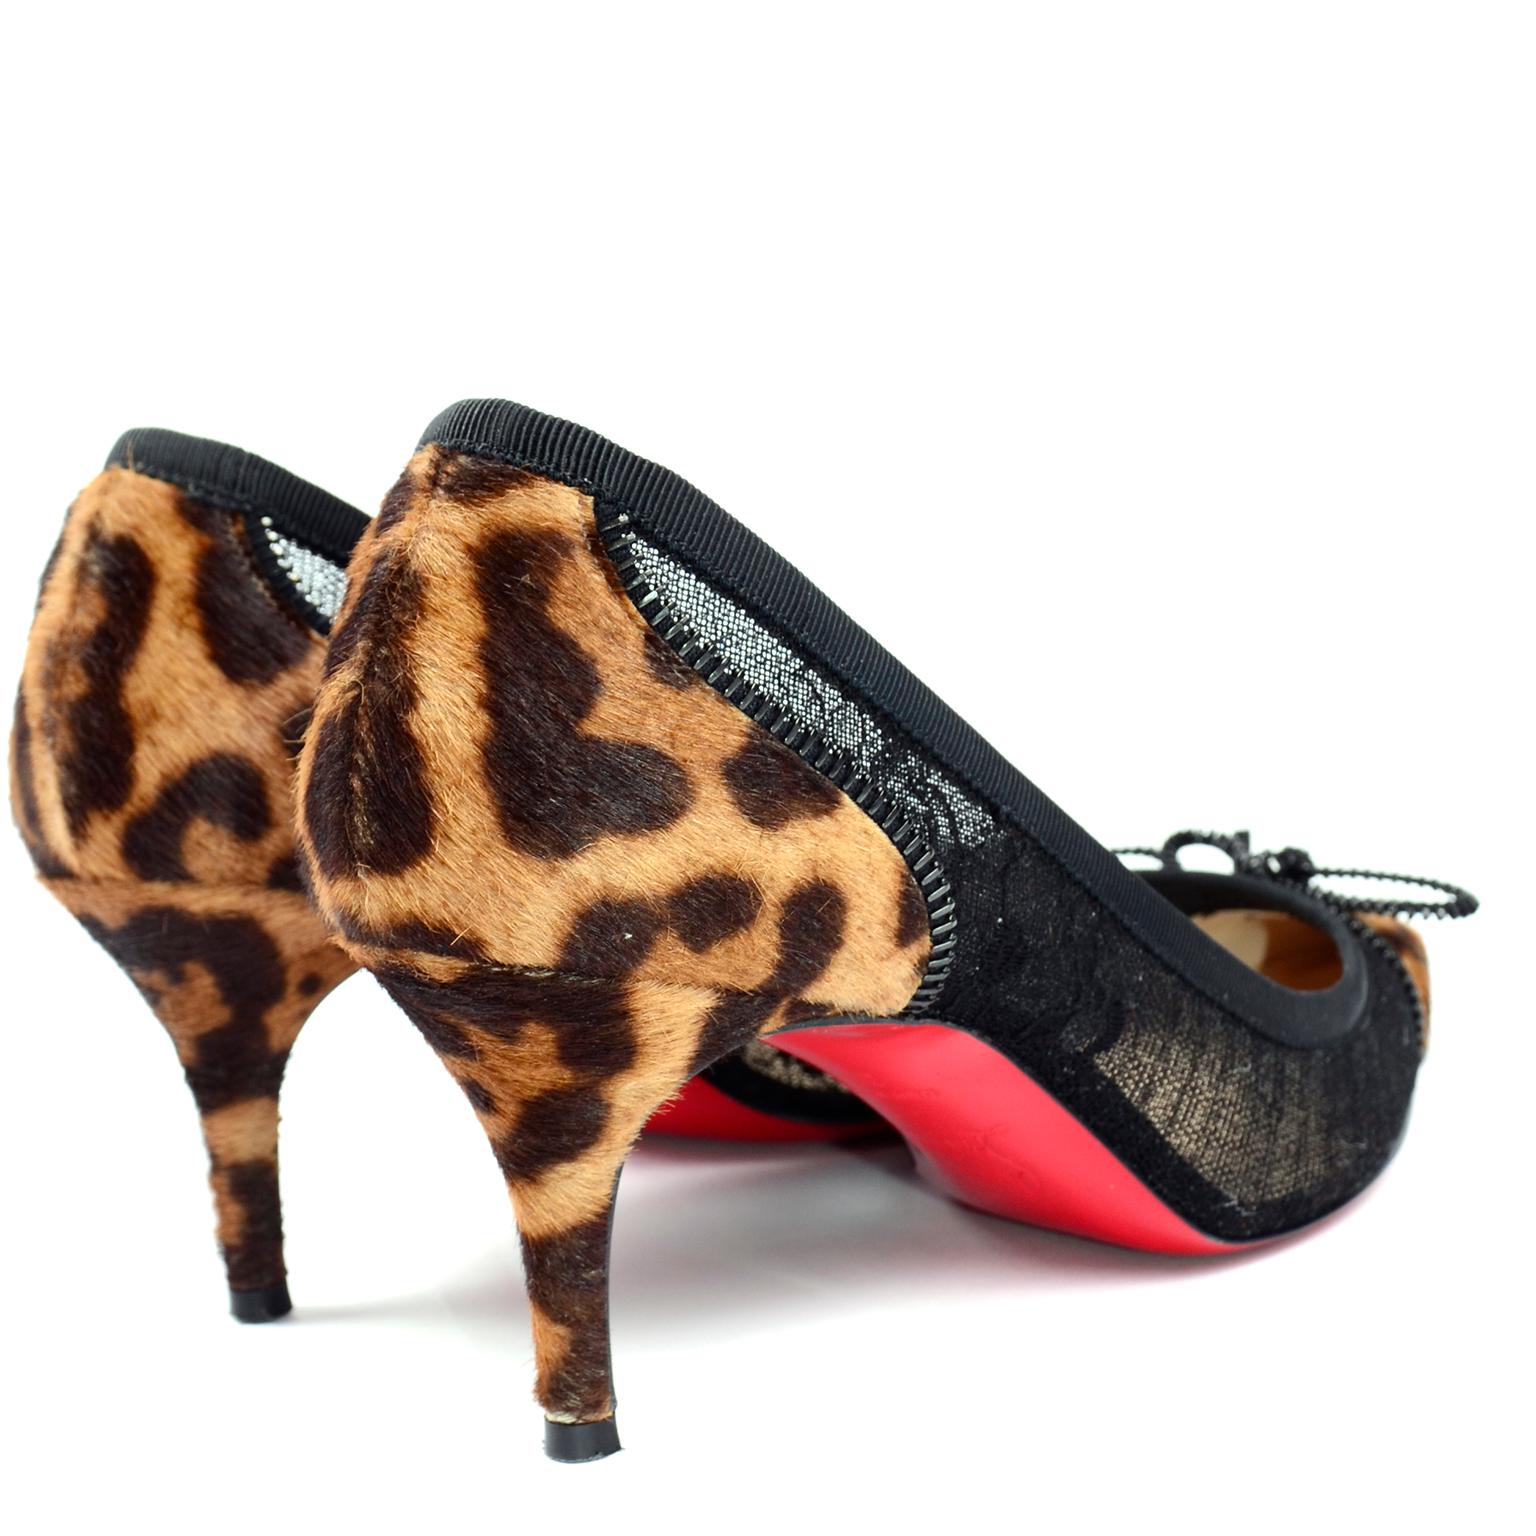 Christian Louboutin Souris 70 Pony Fur Cheetah Lace Zipper Bow Kitten Heel Shoes In Good Condition For Sale In Portland, OR